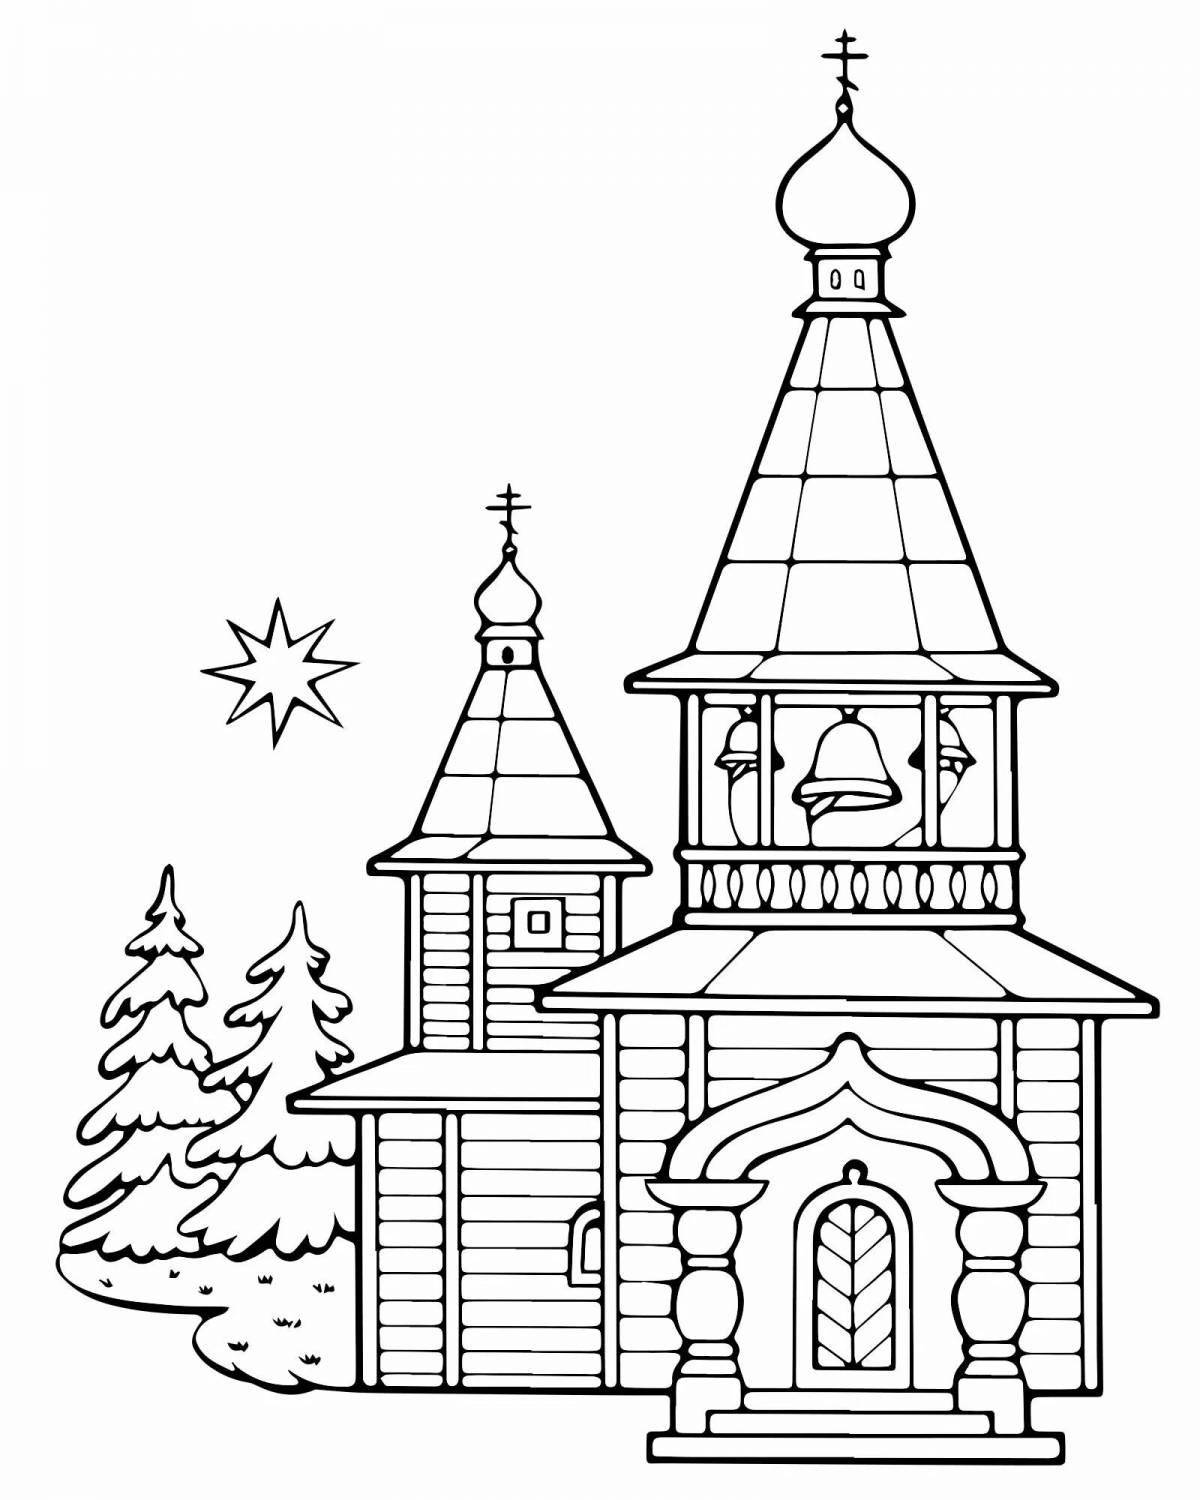 Impressive domed church coloring page